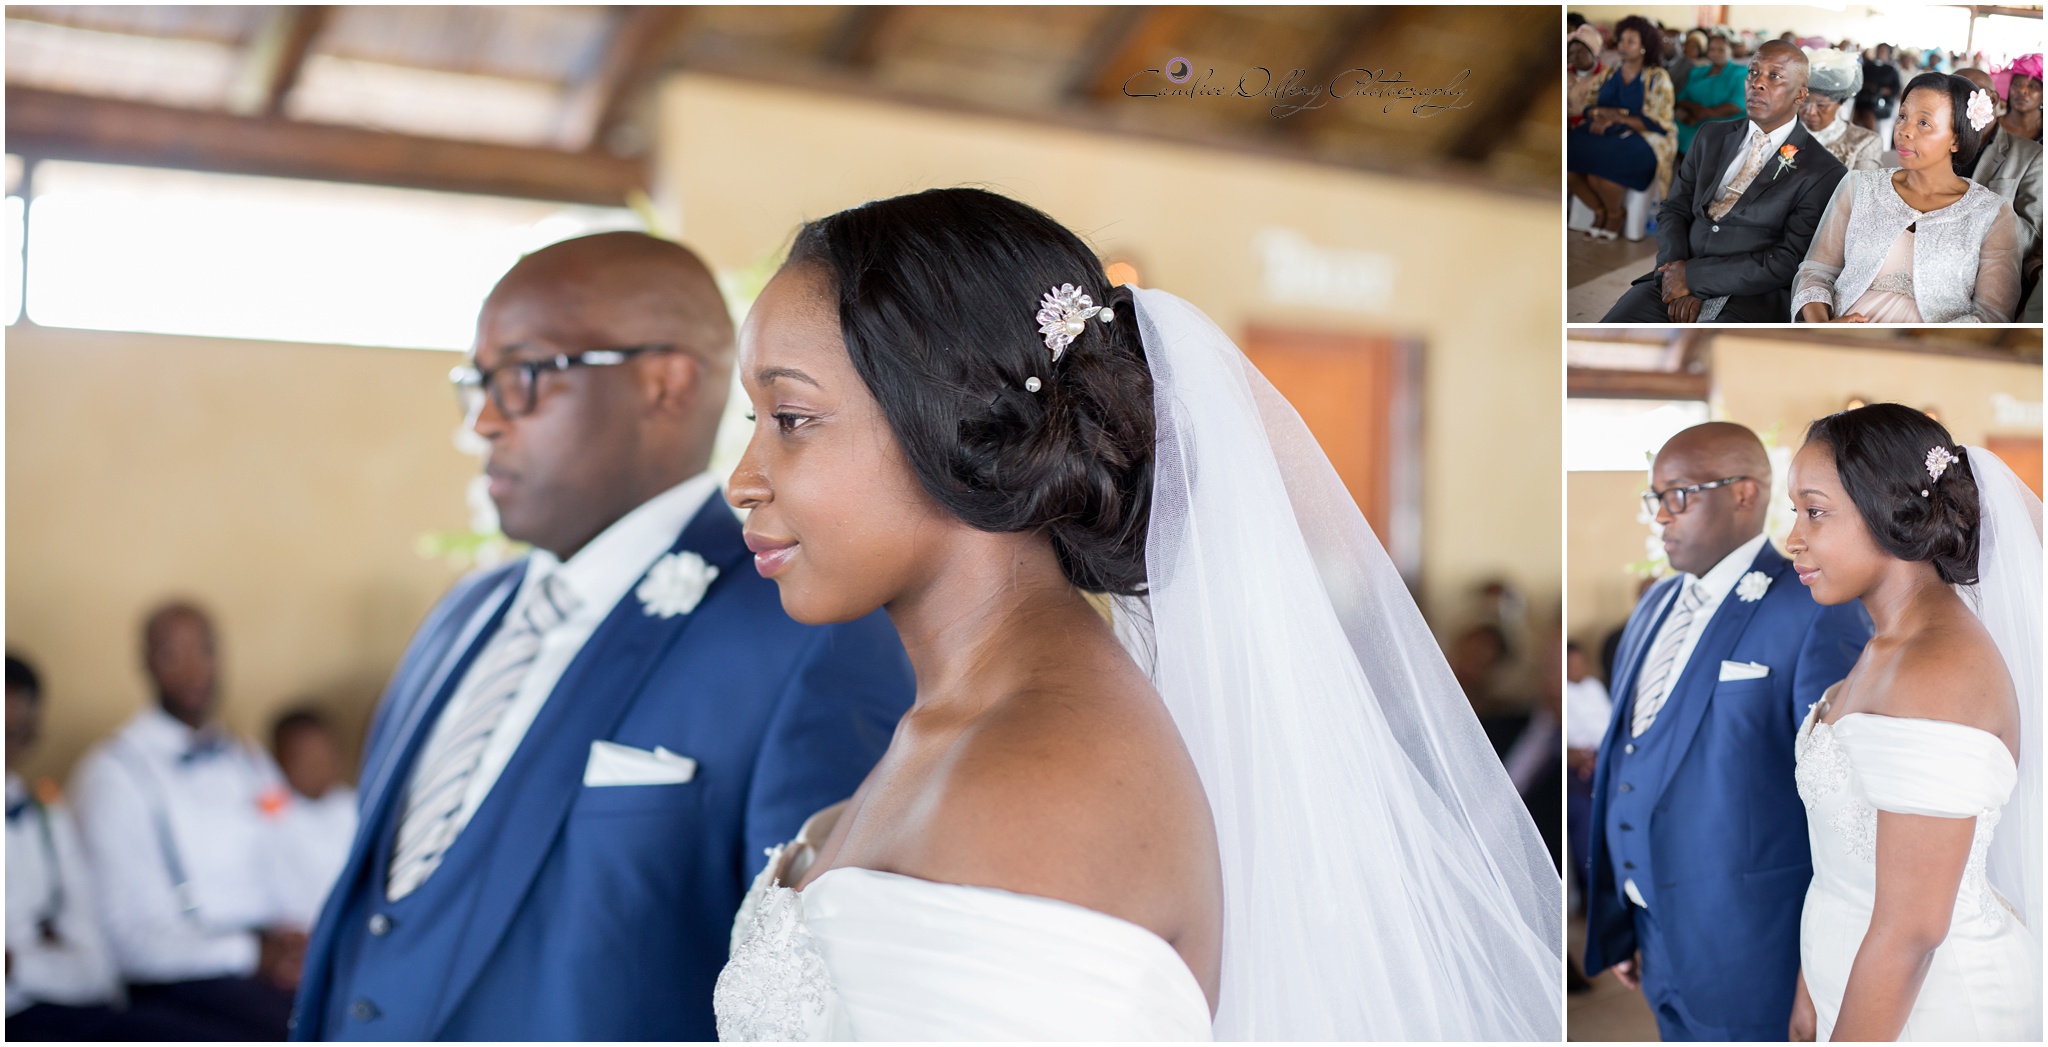 Thembi & Sabelo's Wedding - Candice Dollery Photography_8285